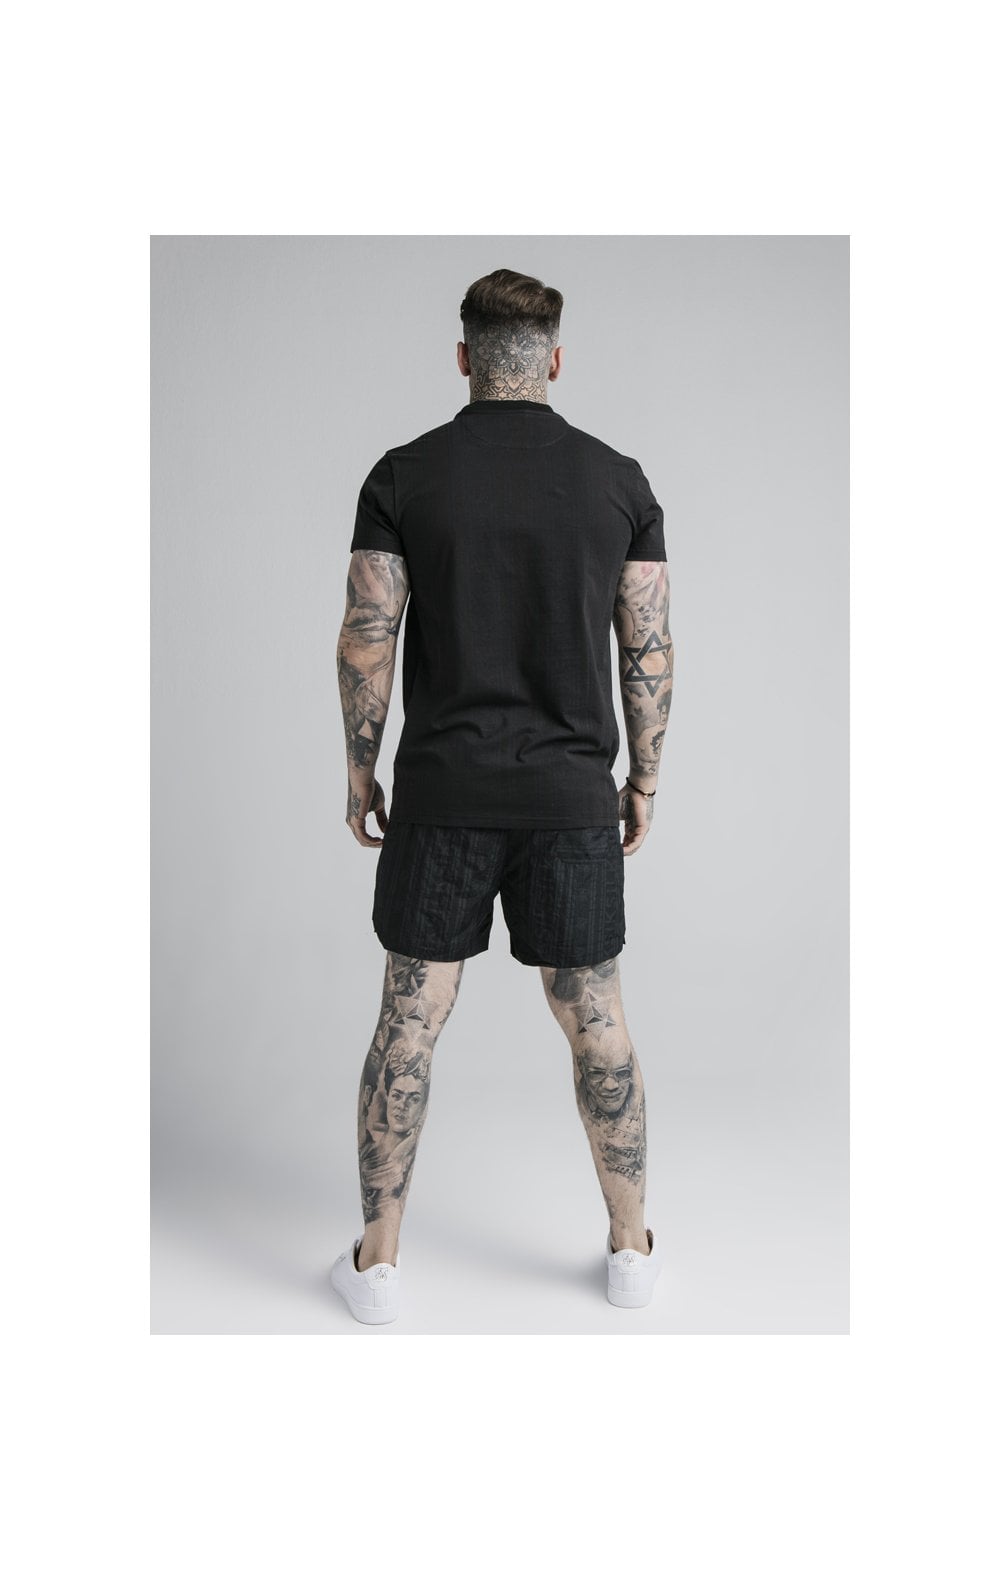 SikSilk S/S Fitted Box Tee - Black & Grey (5)